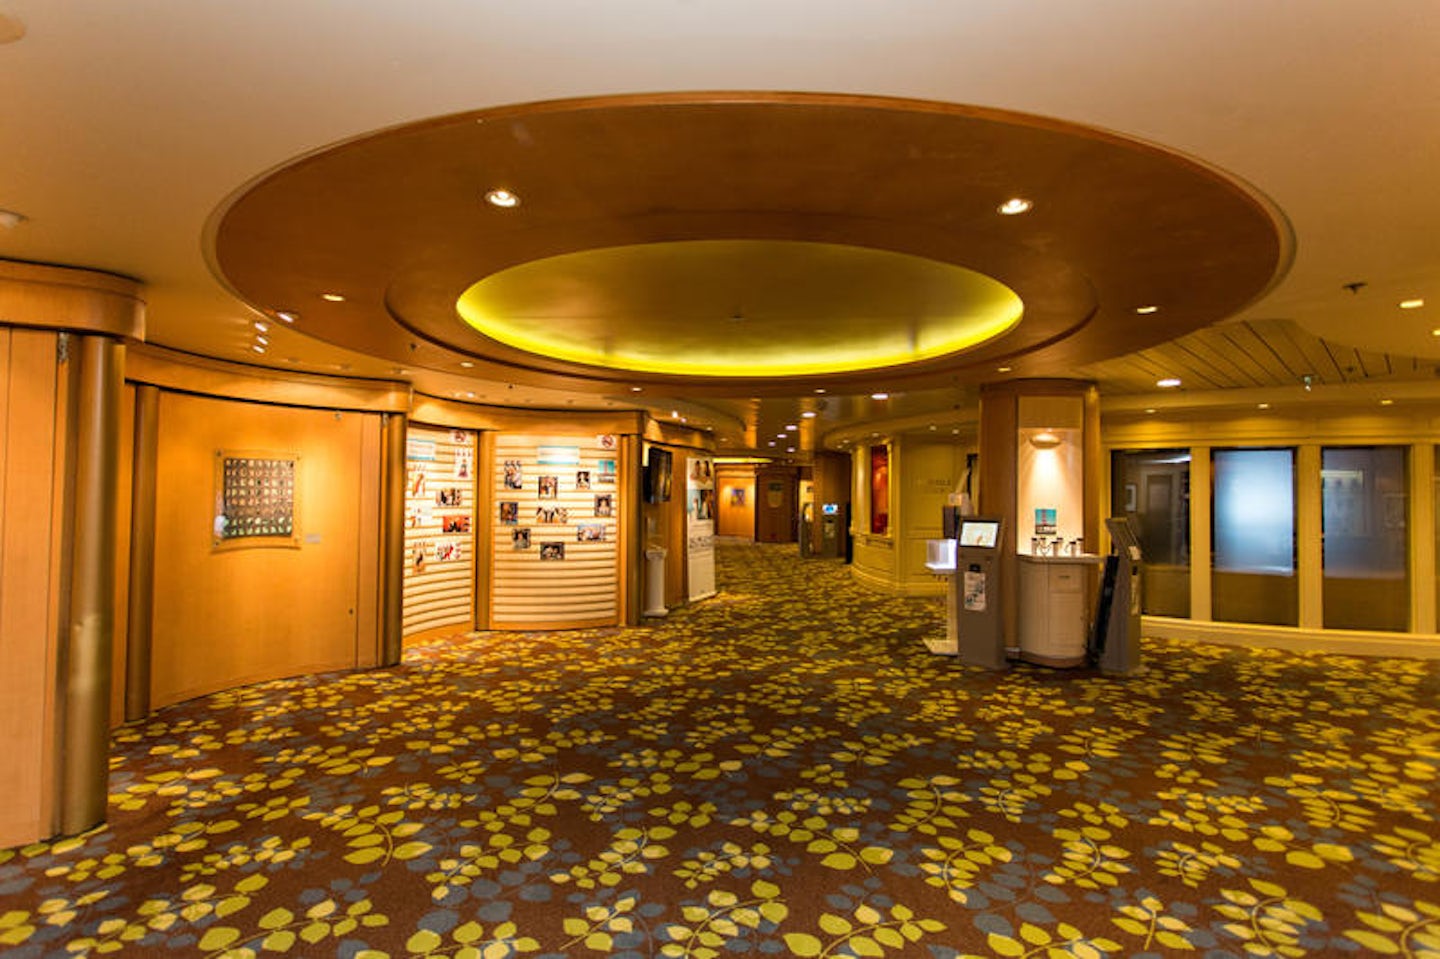 Photo and Video Gallery on Celebrity Infinity